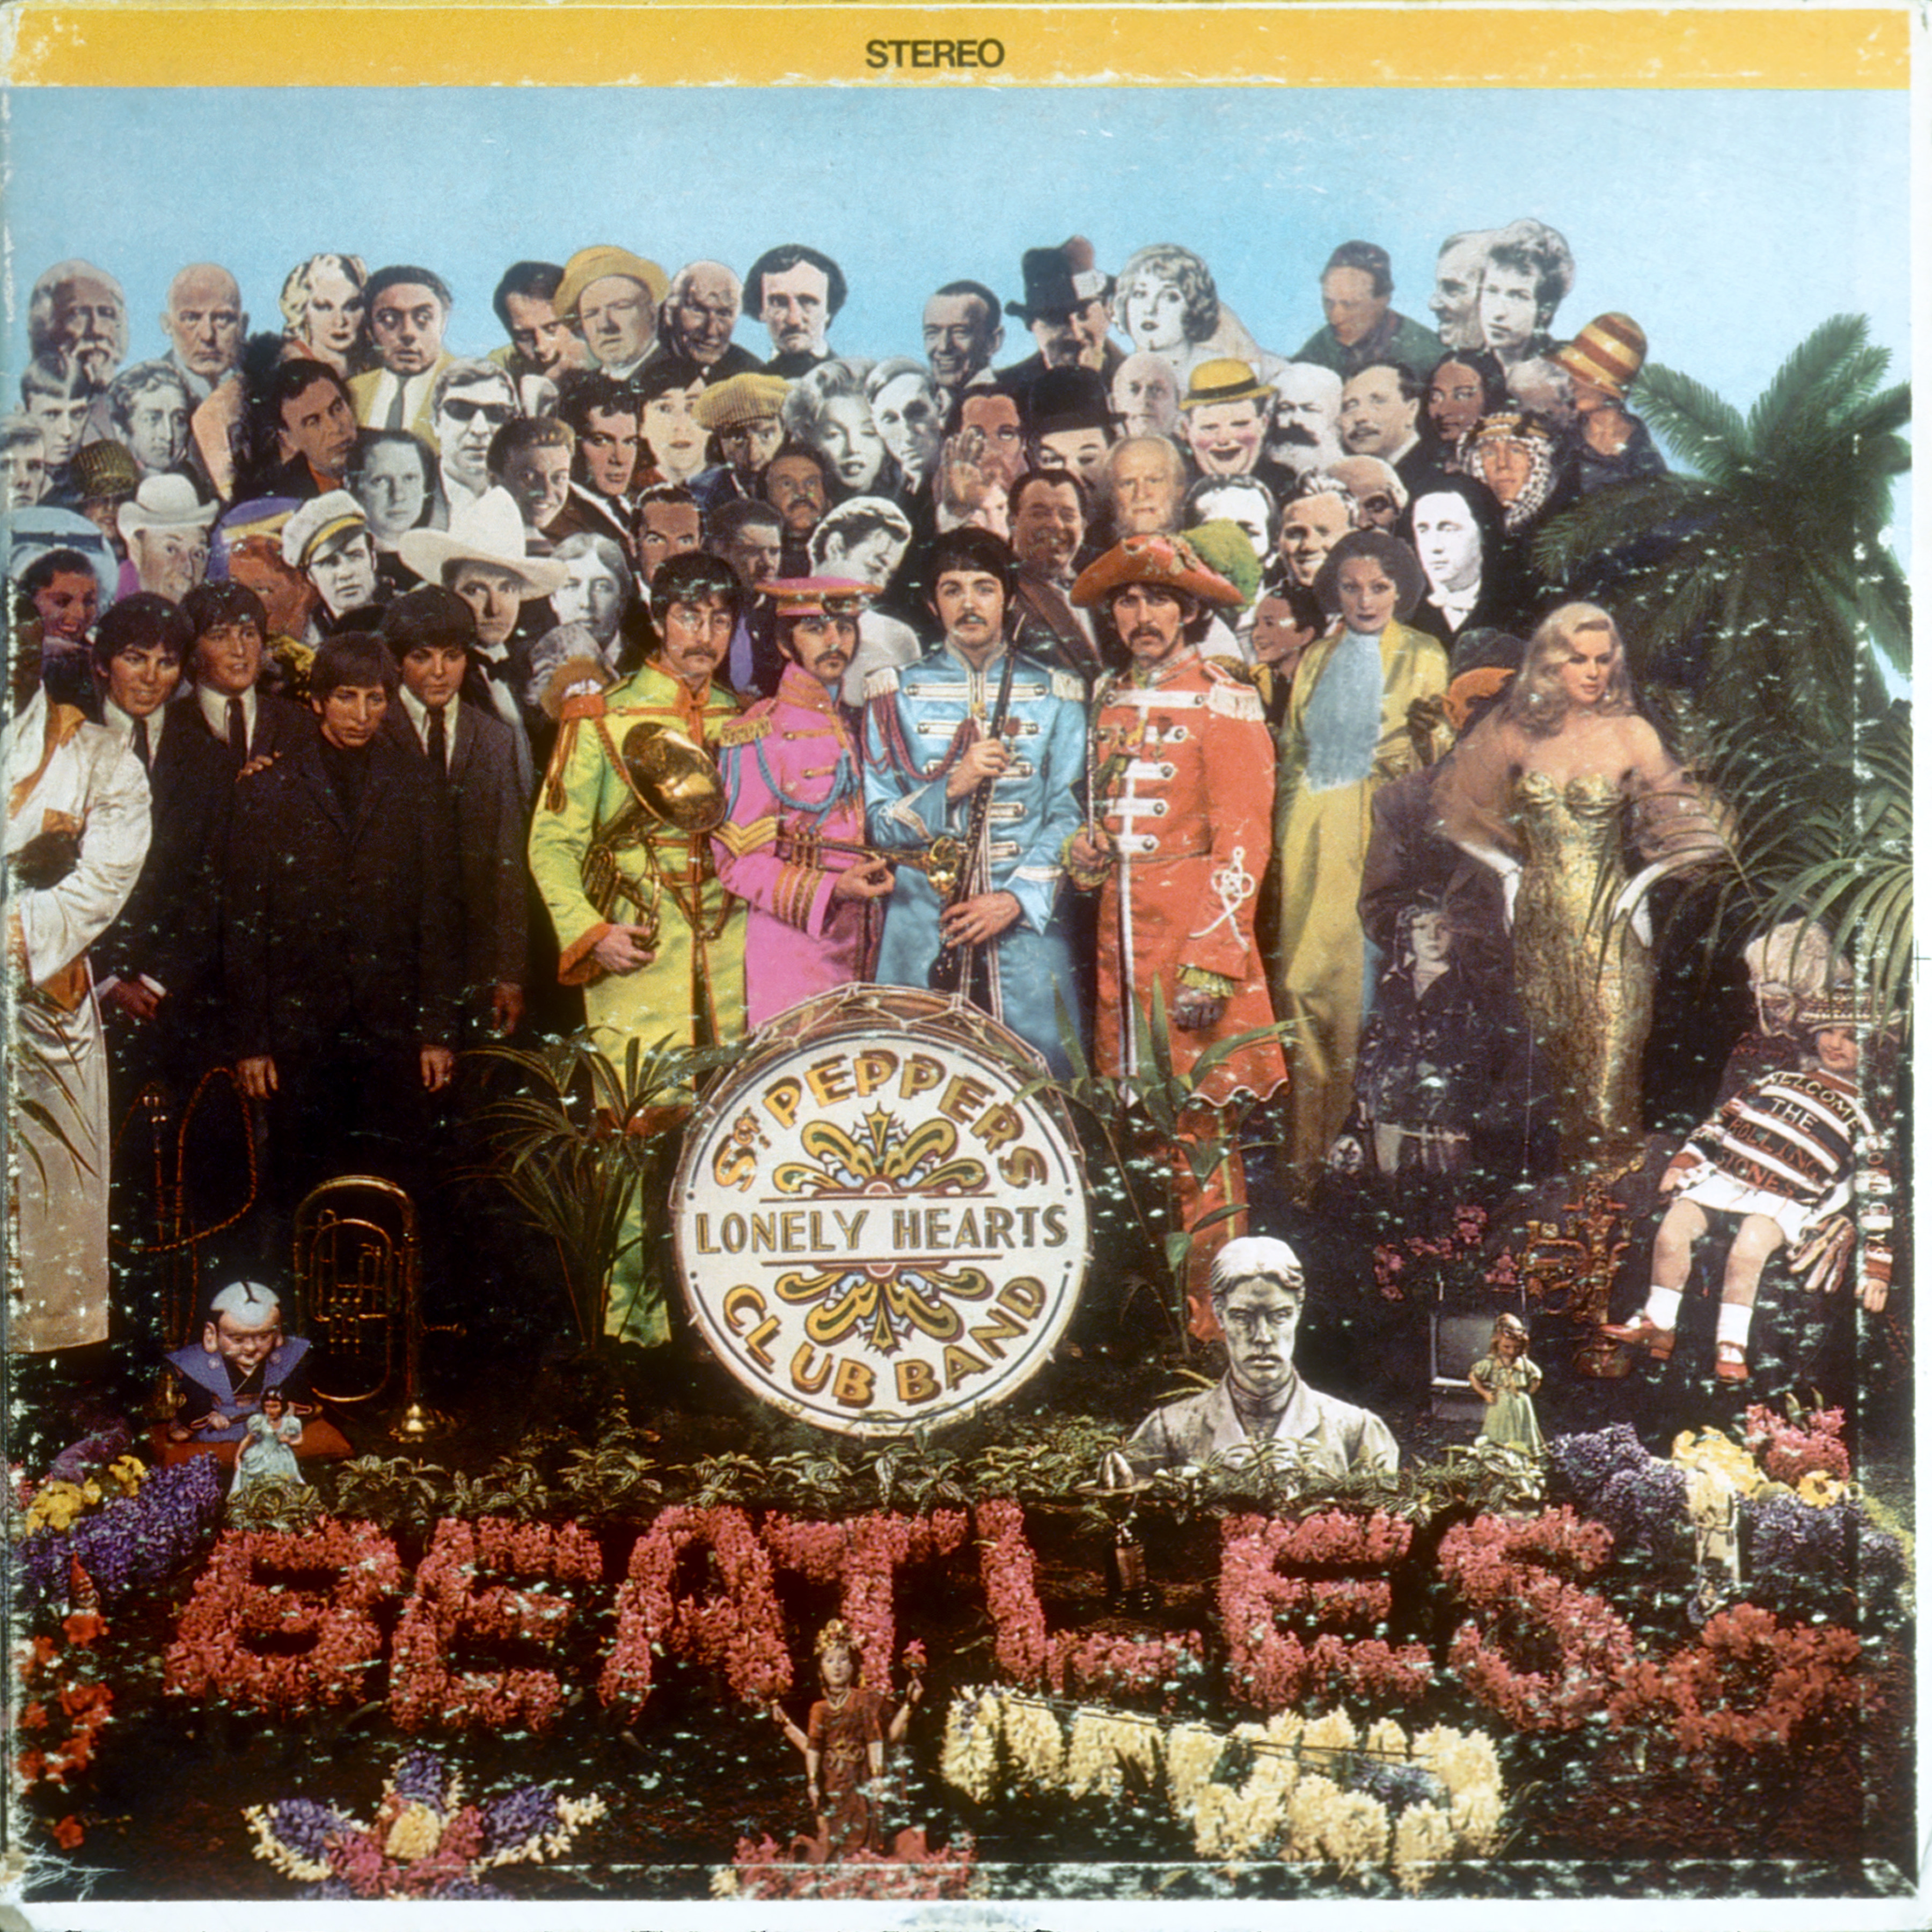 Album Cover For "Sergeant Pepper's Lonely Hearts Club Band"